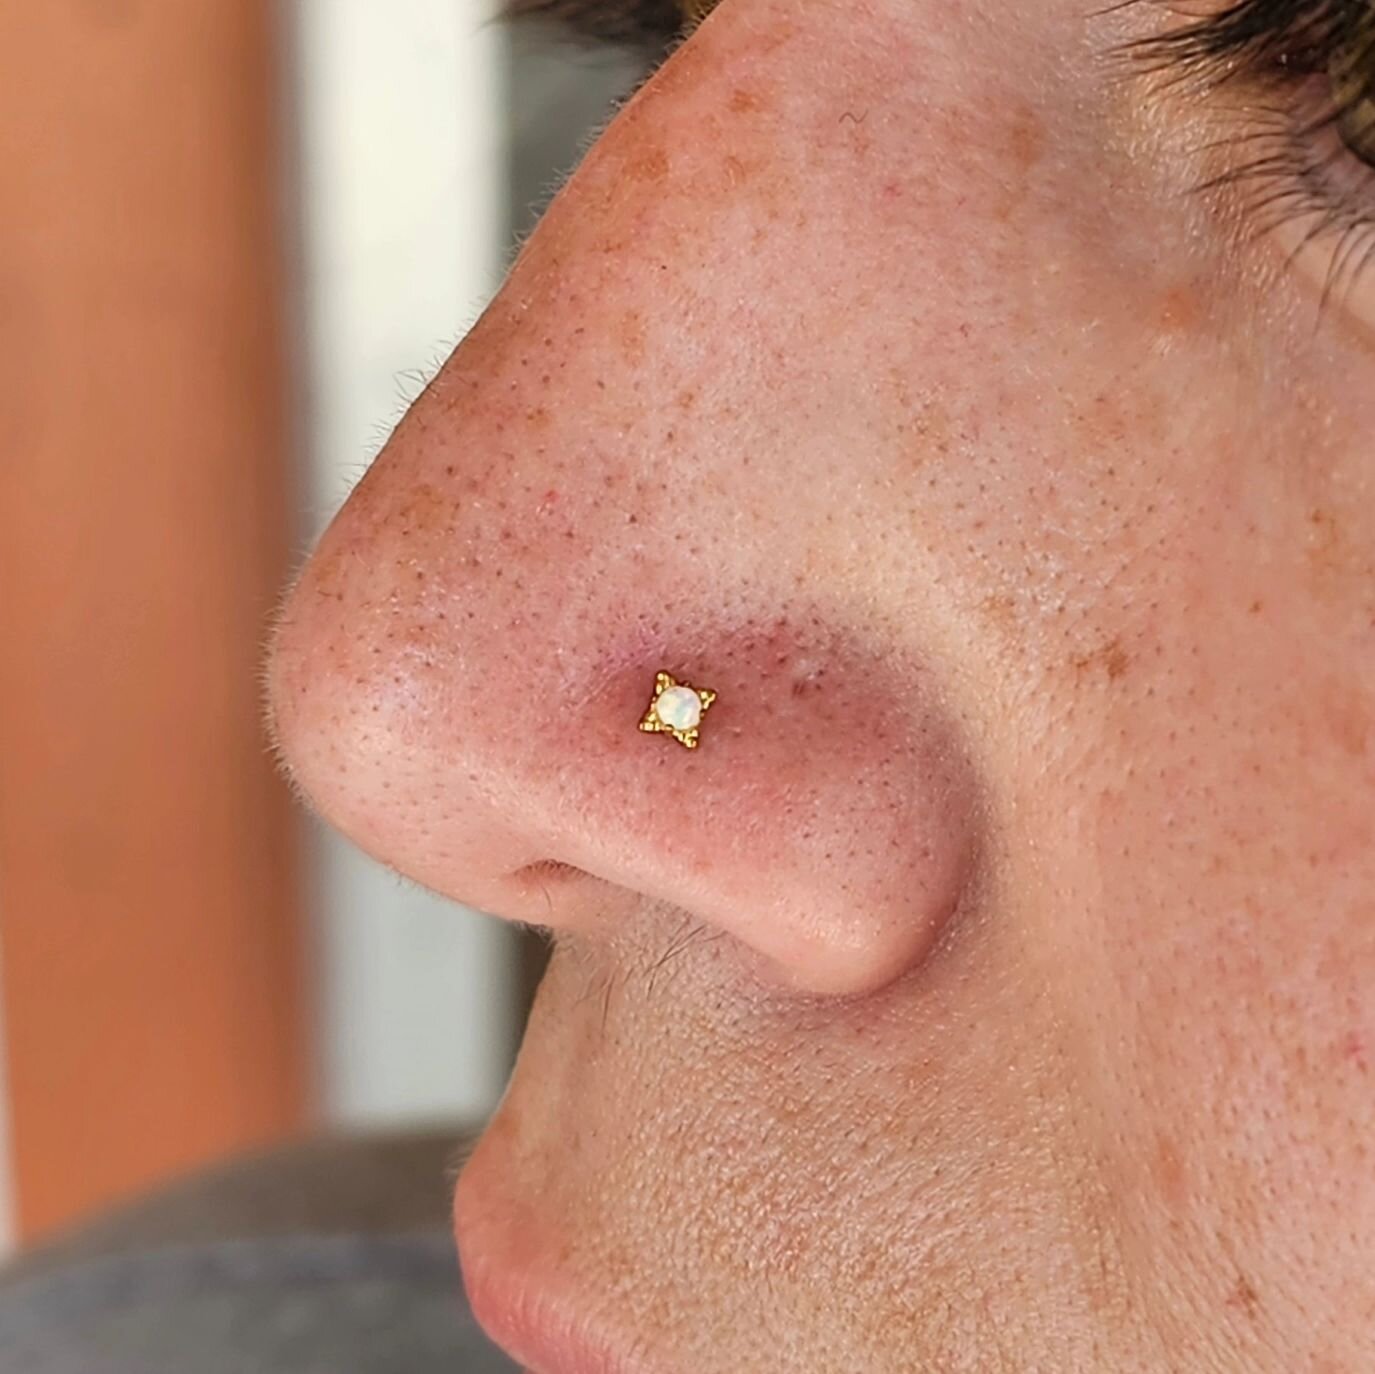 Robert @piercingsbyrobert used this 18kt gold beaded Zia with a white opal from @anatometalinc for this fresh nostril piercing earlier this week.

#nostril #nostrilpiercing #nosepiercing #goldbodyjewelry #goldjewelry #bodyjewelry #bodypiercing #legit